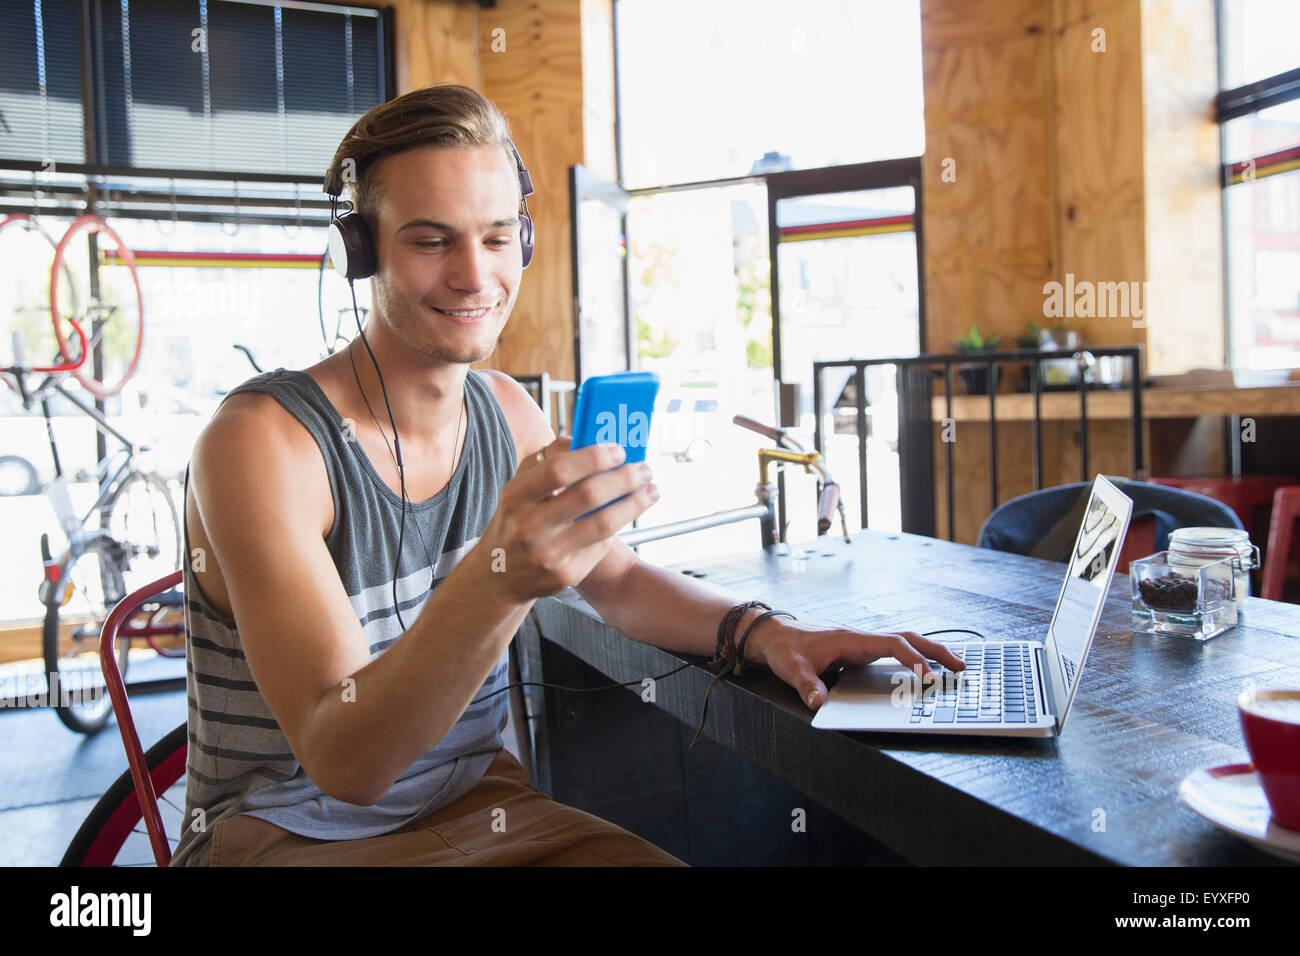 Smiling young man with headphones texting with cell phone at laptop in cafe Stock Photo